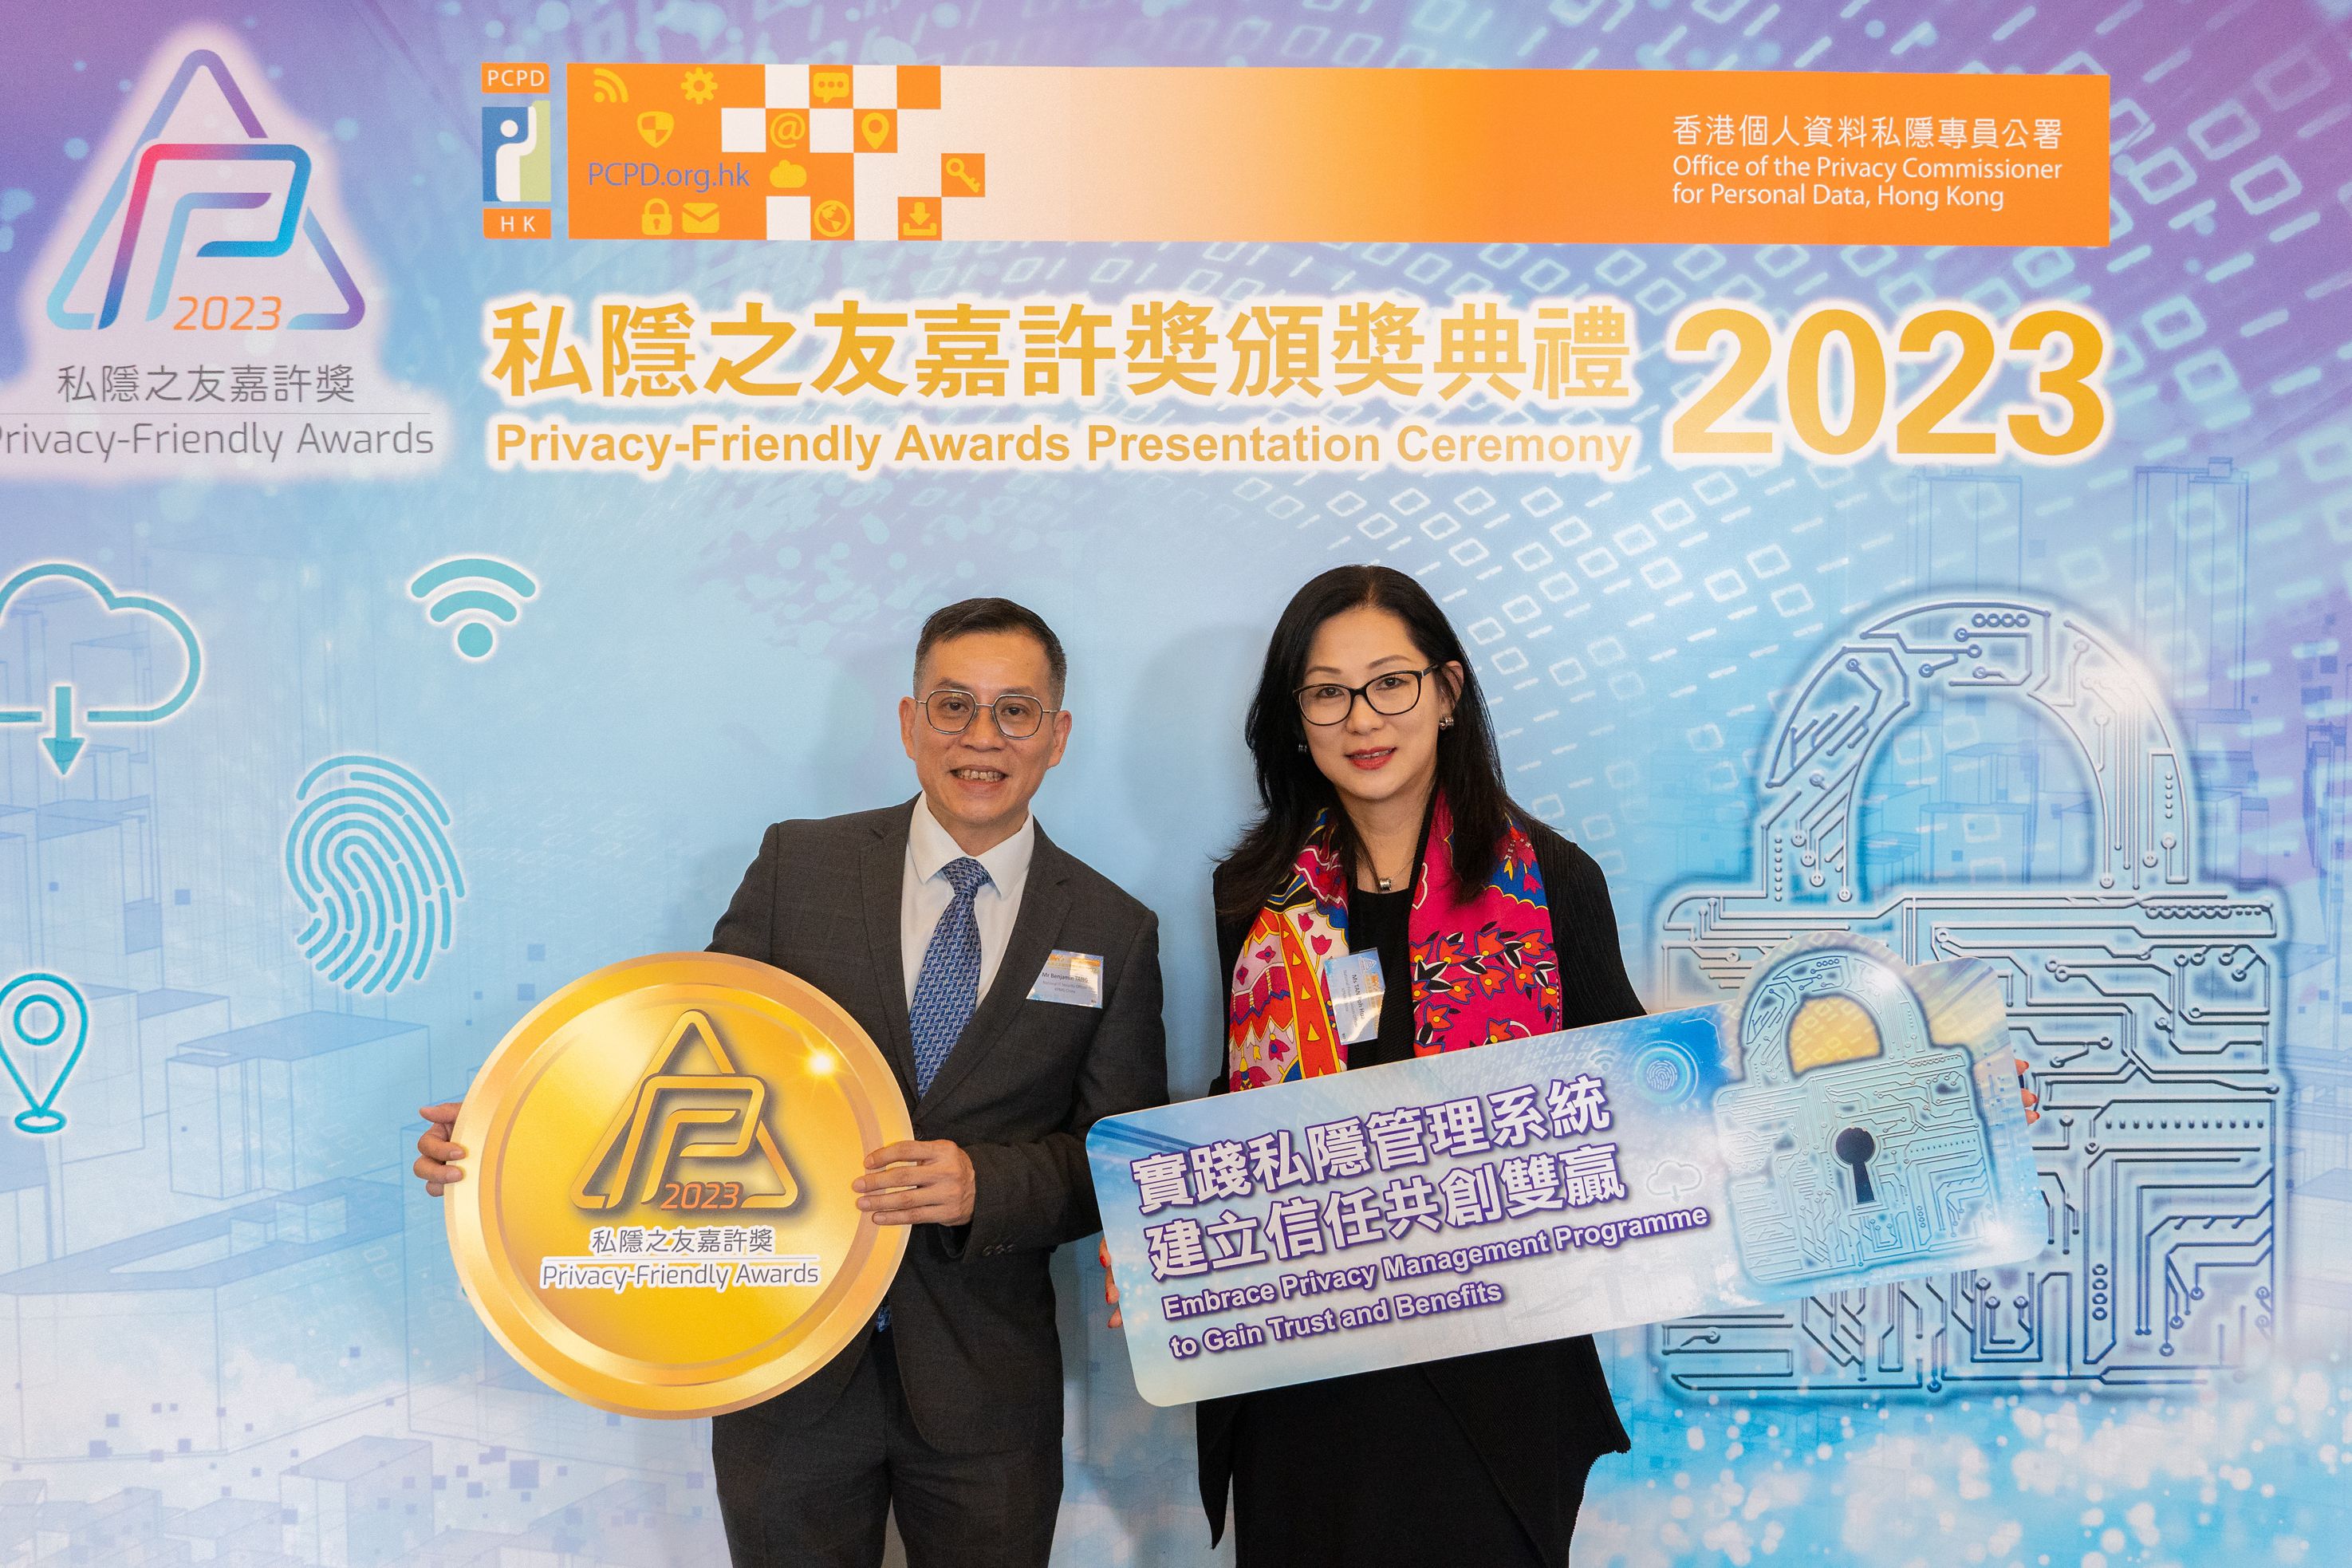 KPMG China Garners Outstanding Gold Award at the PCPD’s Privacy-Friendly Awards 2023